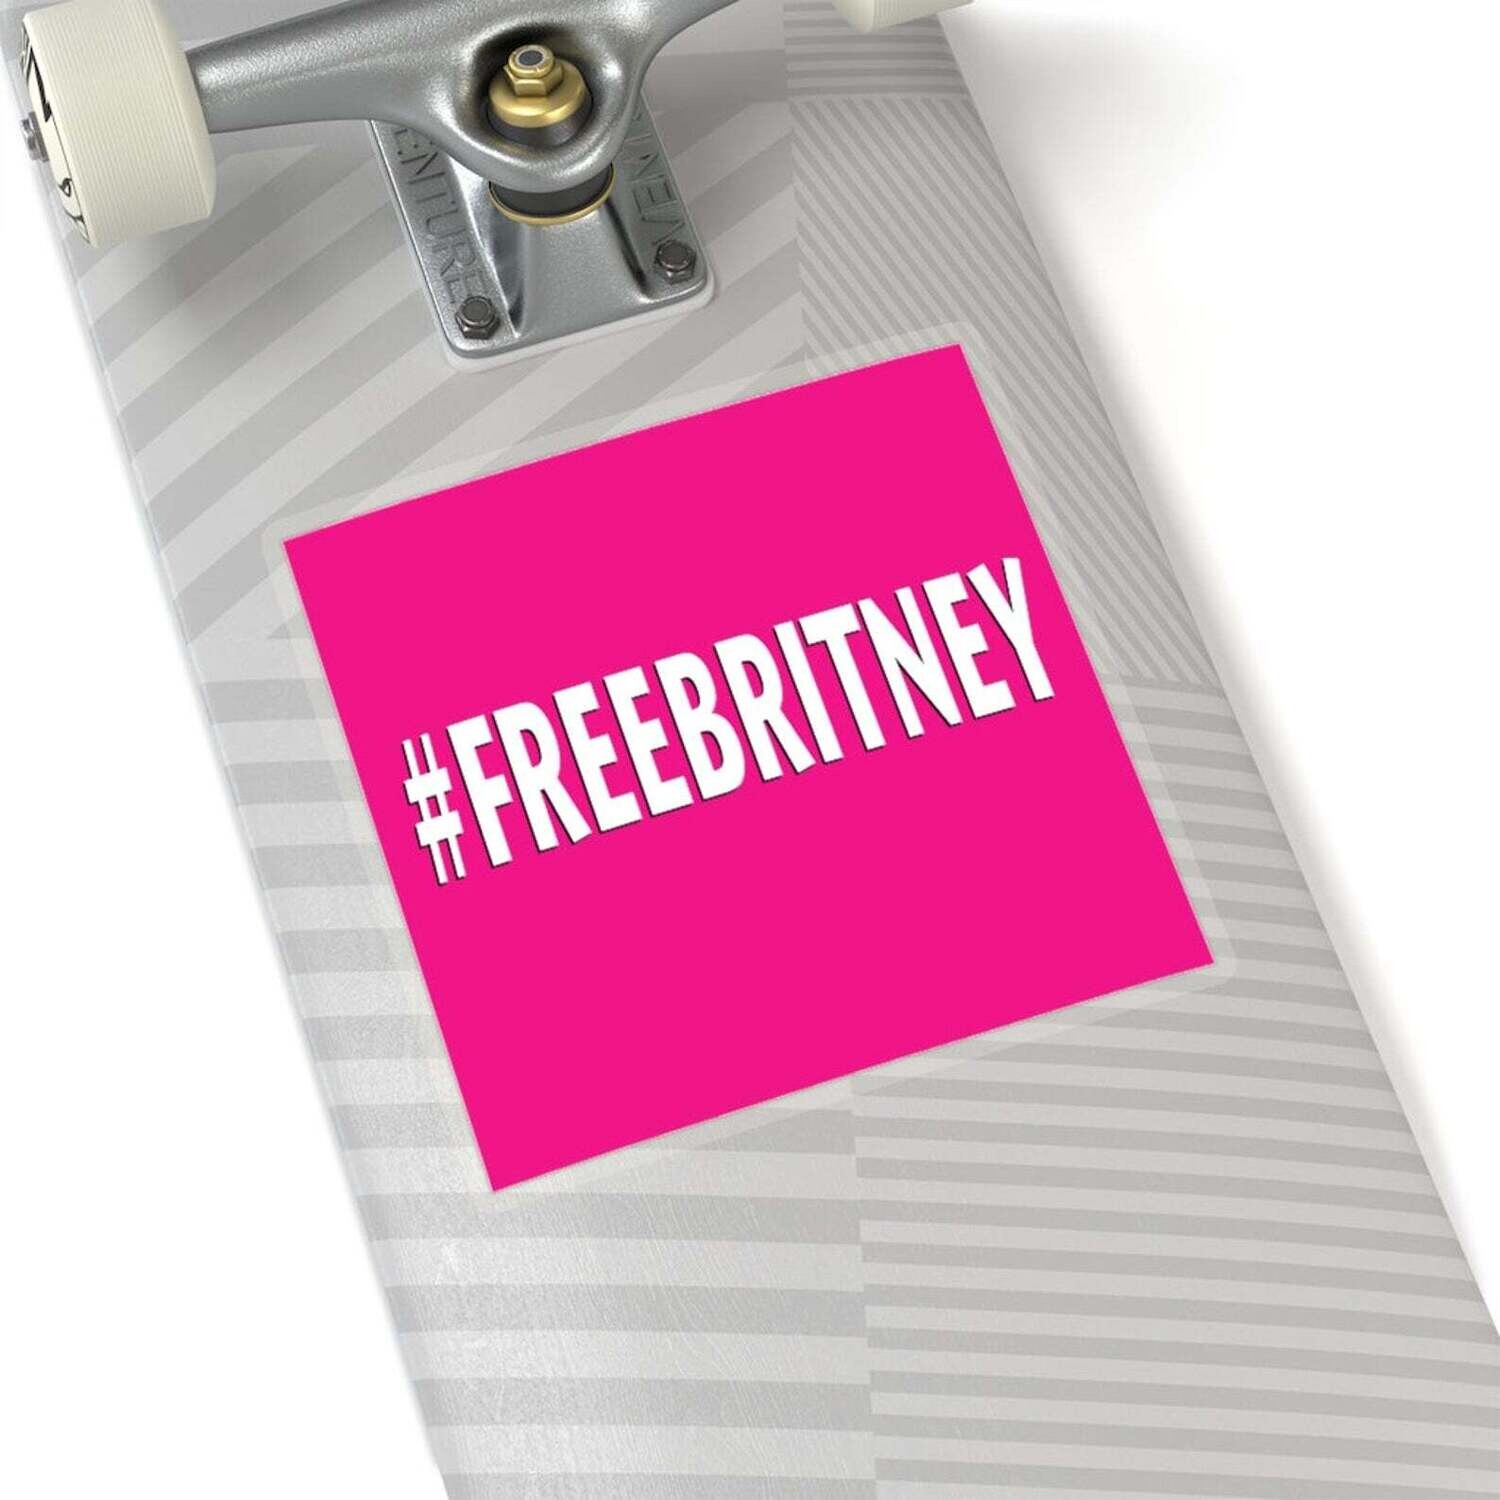 Kiss-Cut Stickers Free Britney, #freebritney, human rights, women's rights, freedom, gift, 4 sizes 2x2" to 6x6"